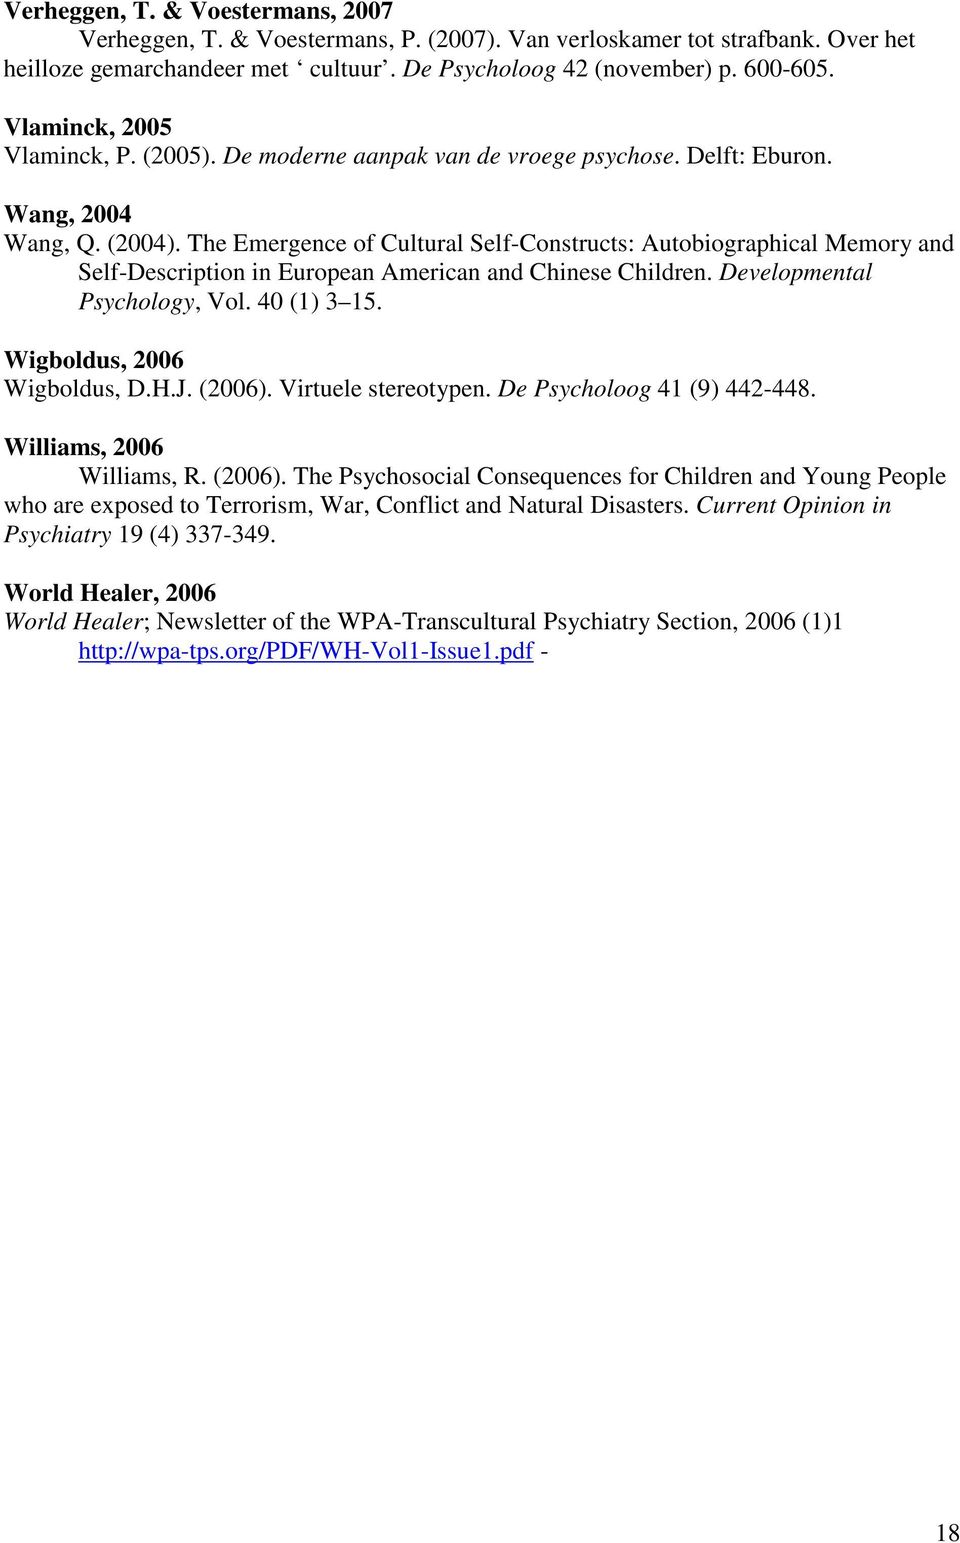 The Emergence of Cultural Self-Constructs: Autobiographical Memory and Self-Description in European American and Chinese Children. Developmental Psychology, Vol. 40 (1) 3 15.